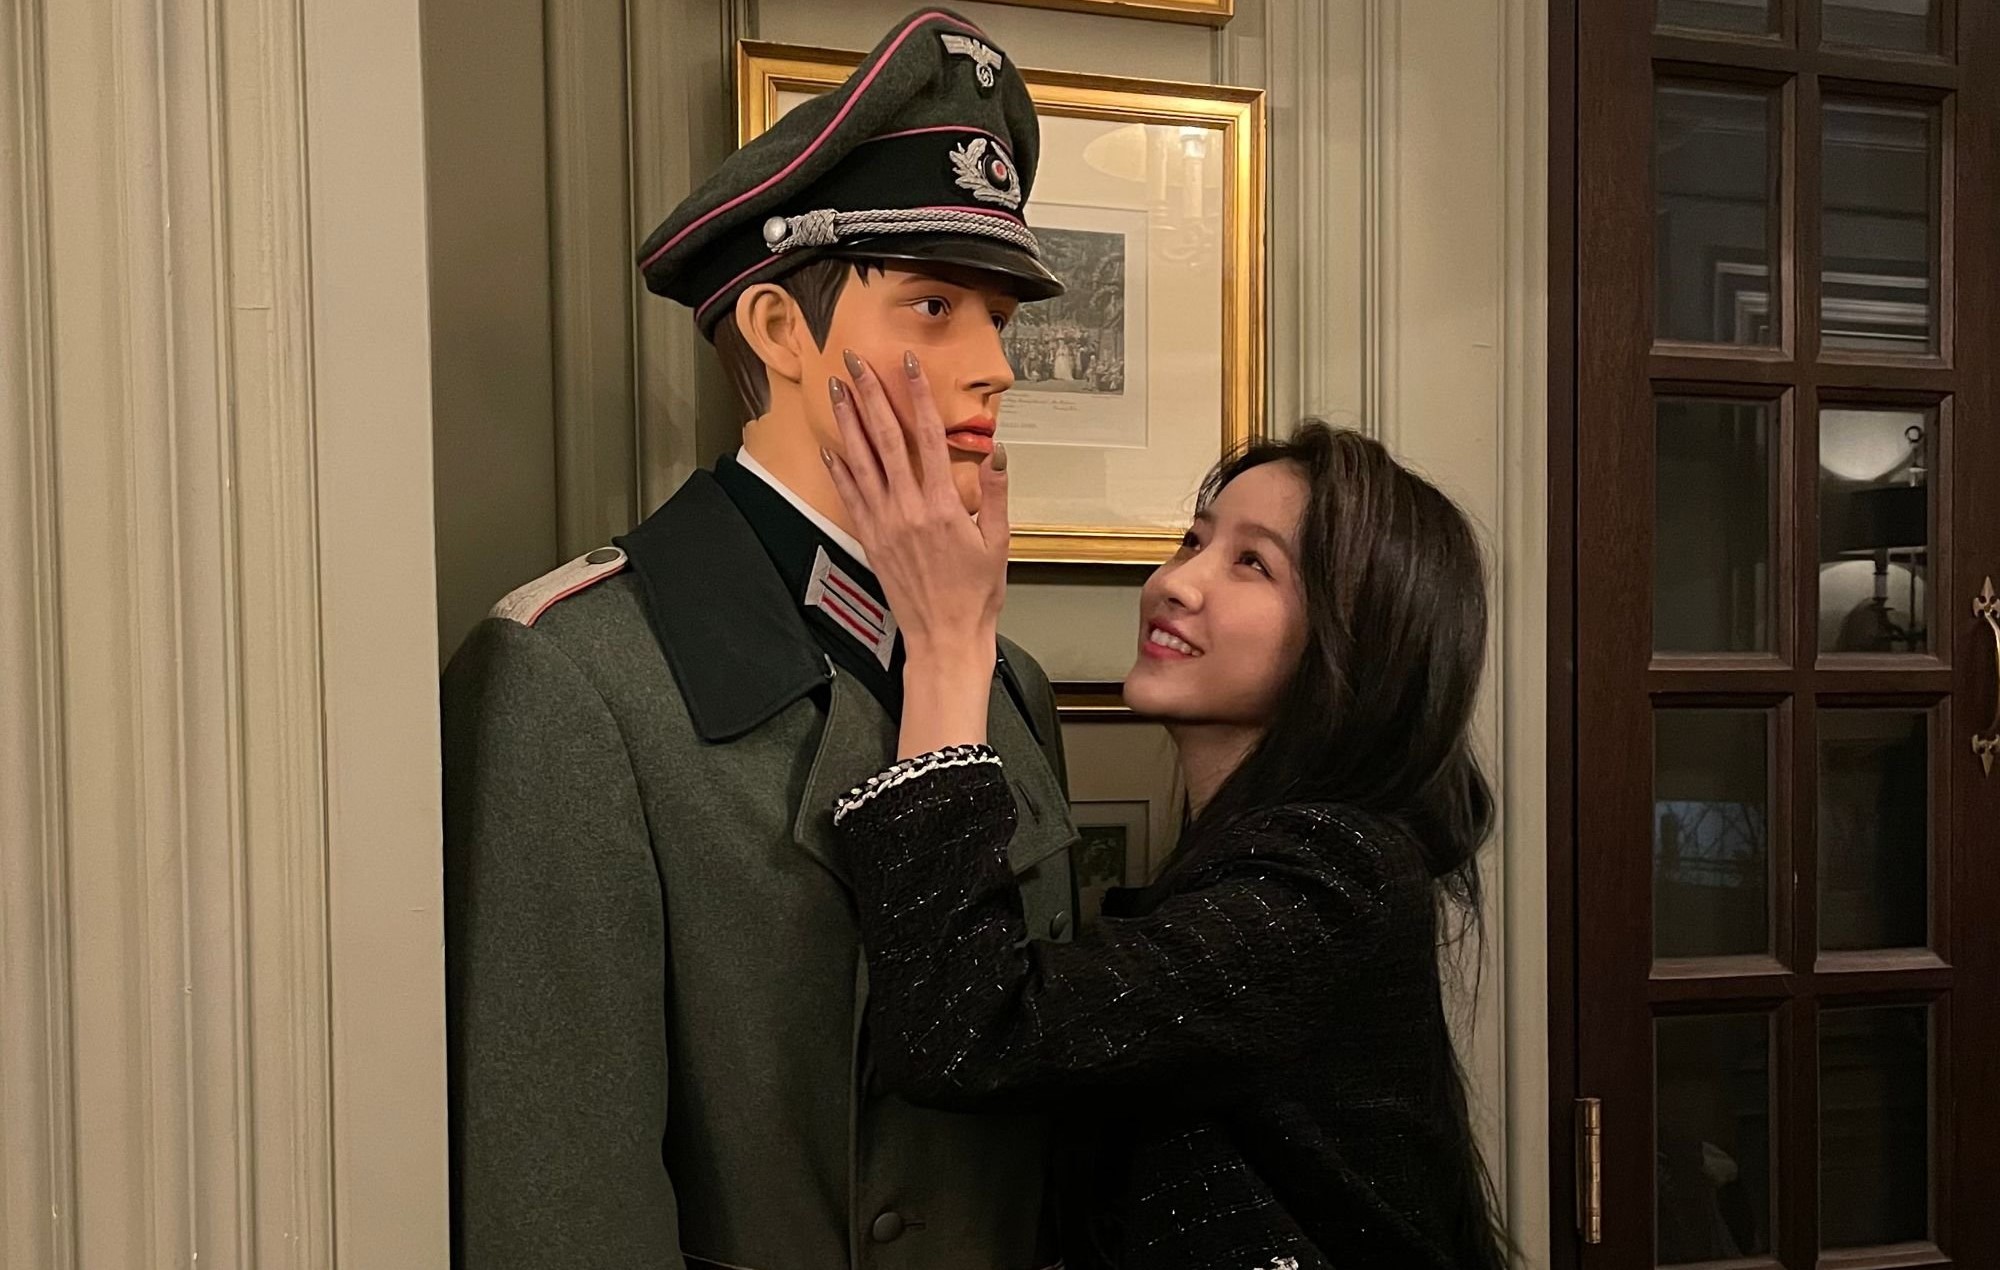 GFRIEND's Sowon sparks controversy with Nazi mannequin photo